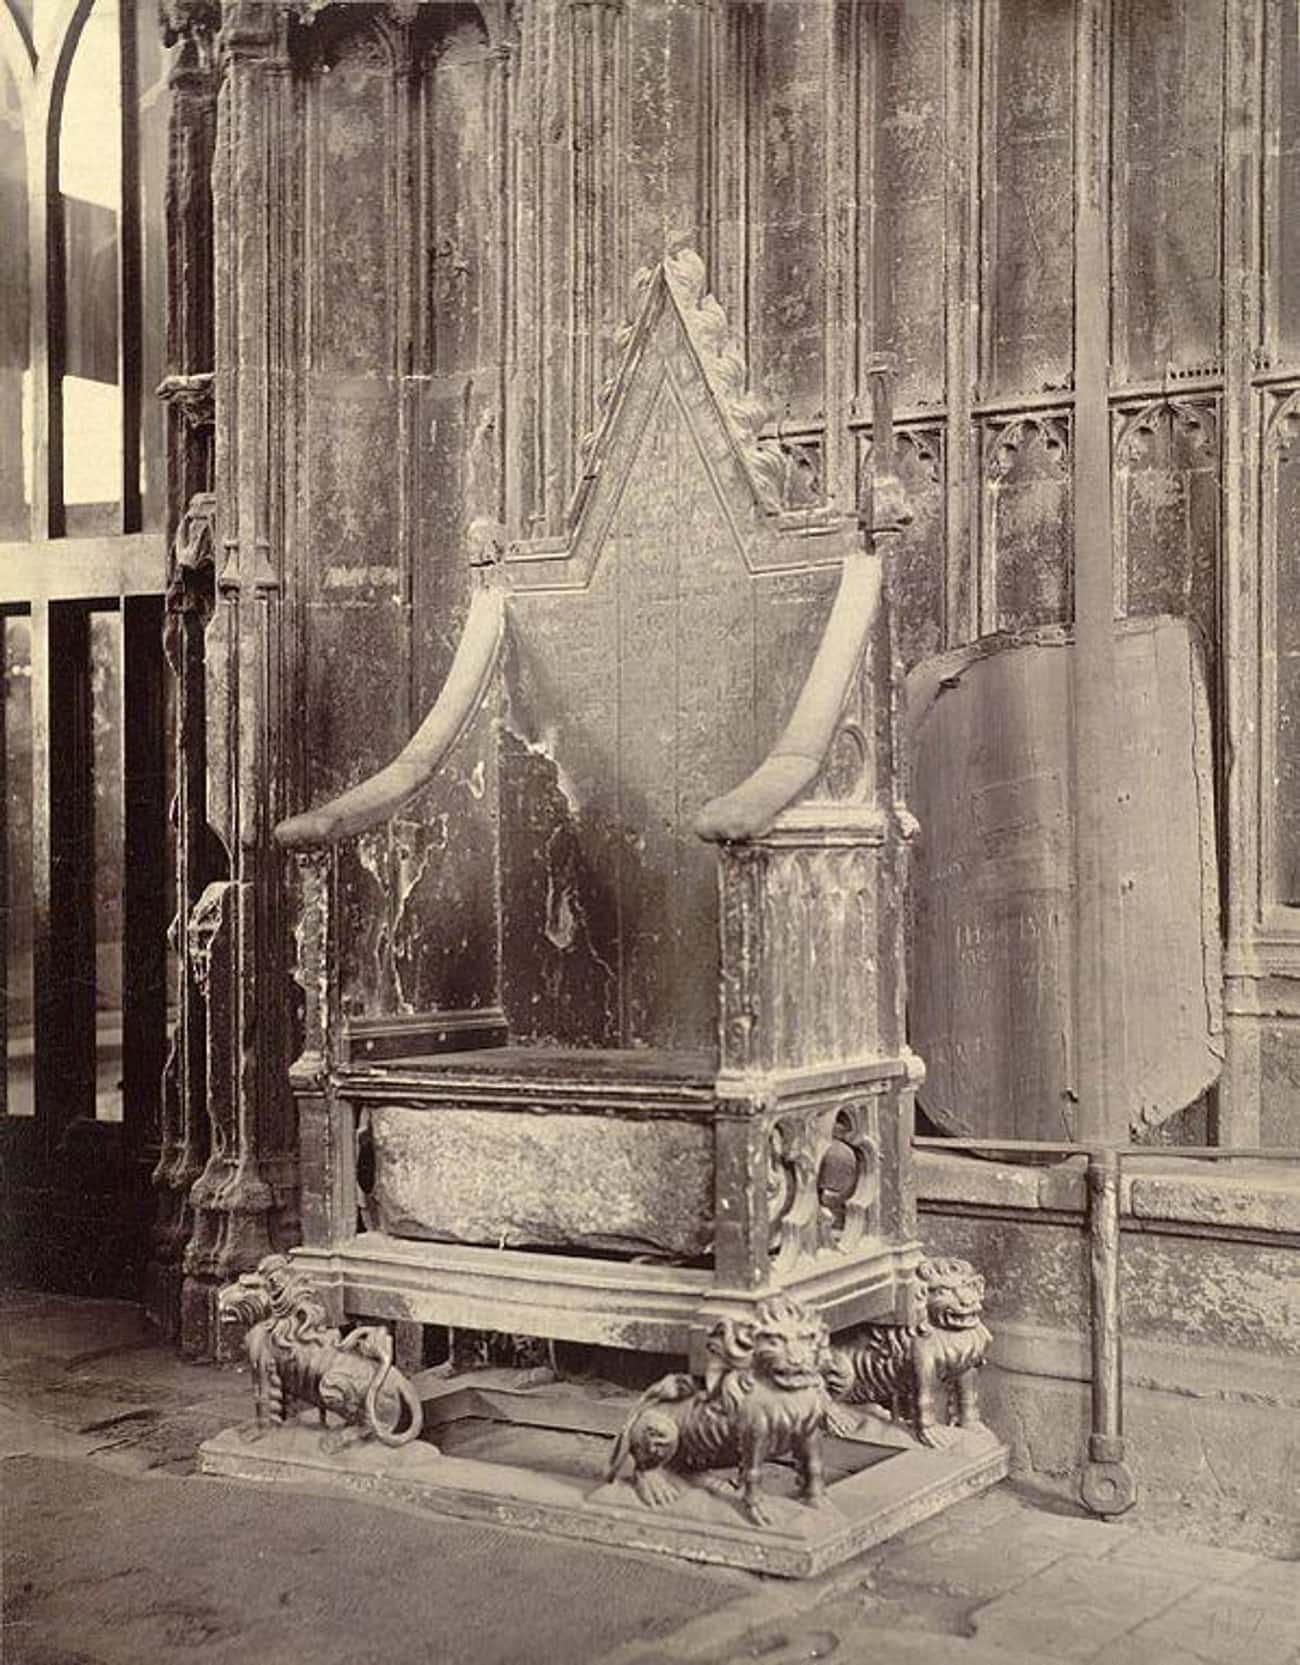 The Stone Of Scone Within The Coronation Chair Has A Complicated History